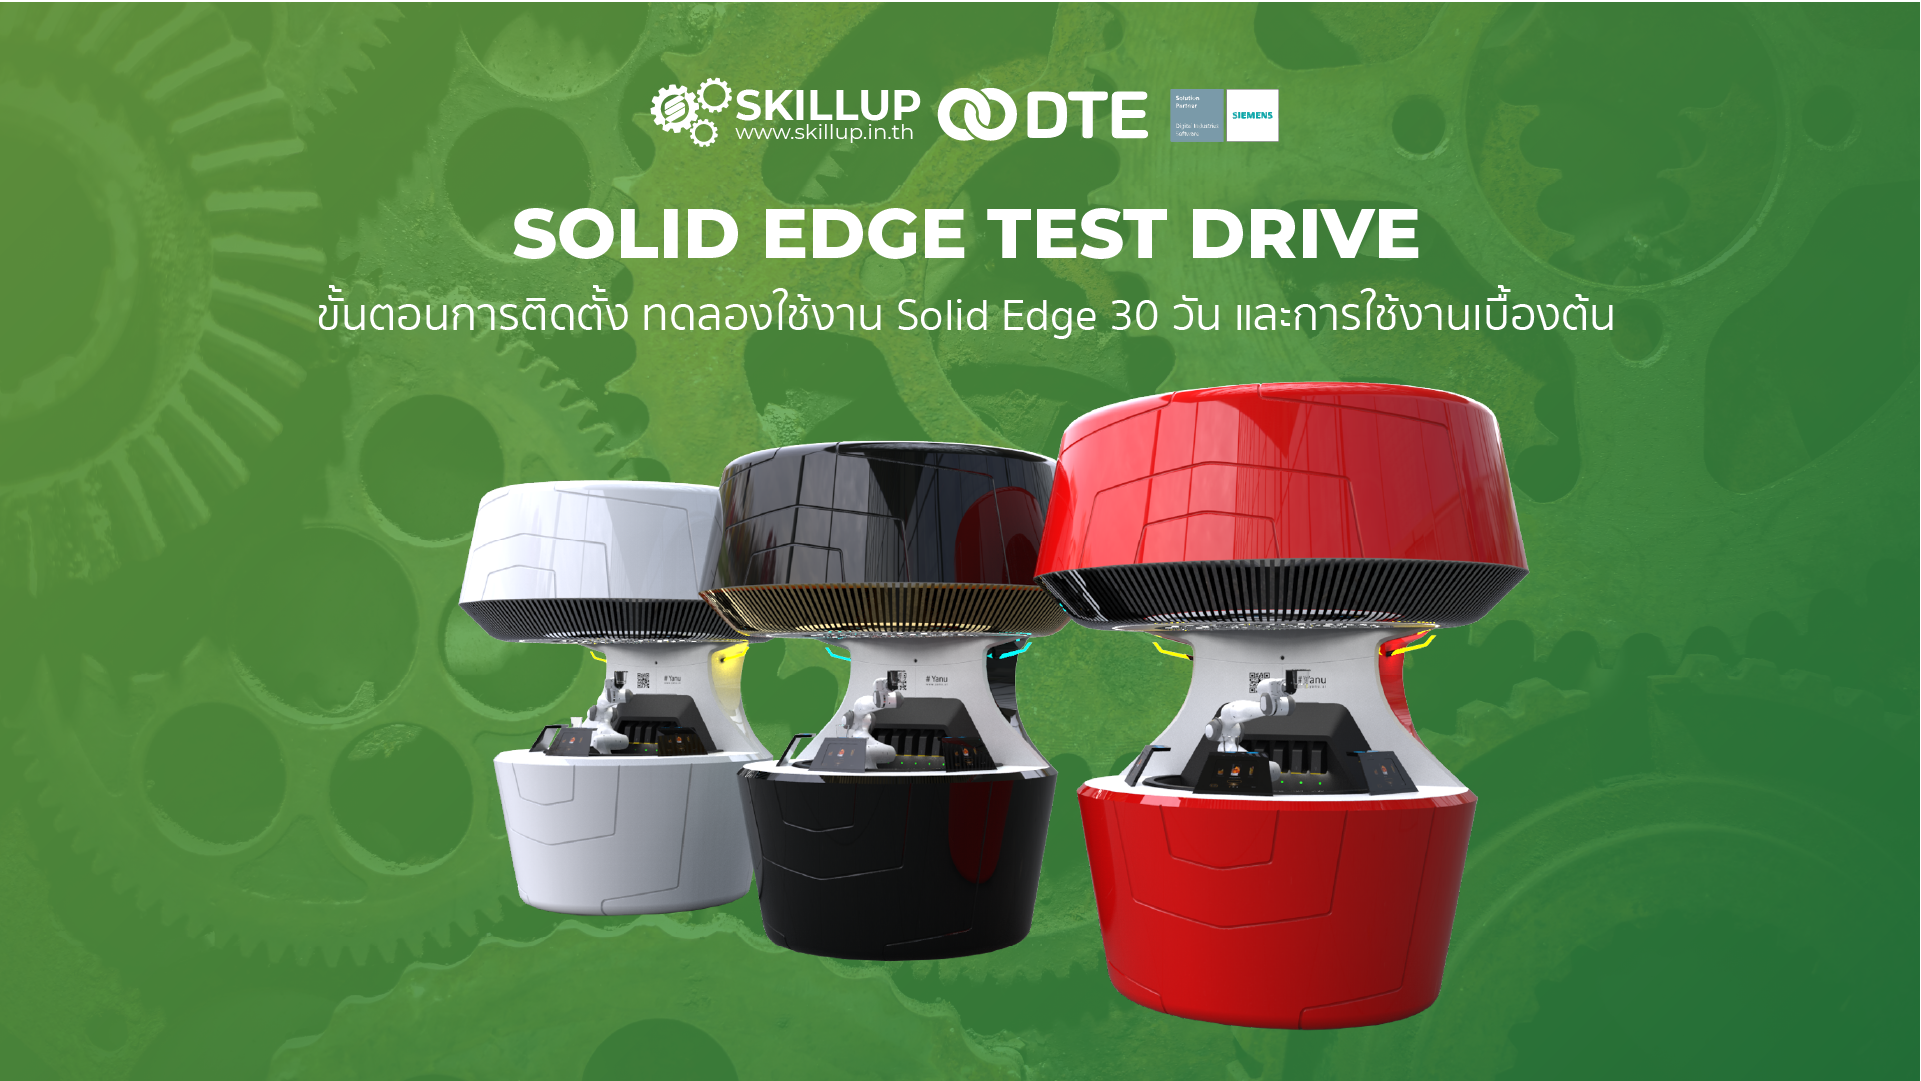 Solid Edge Test Drive